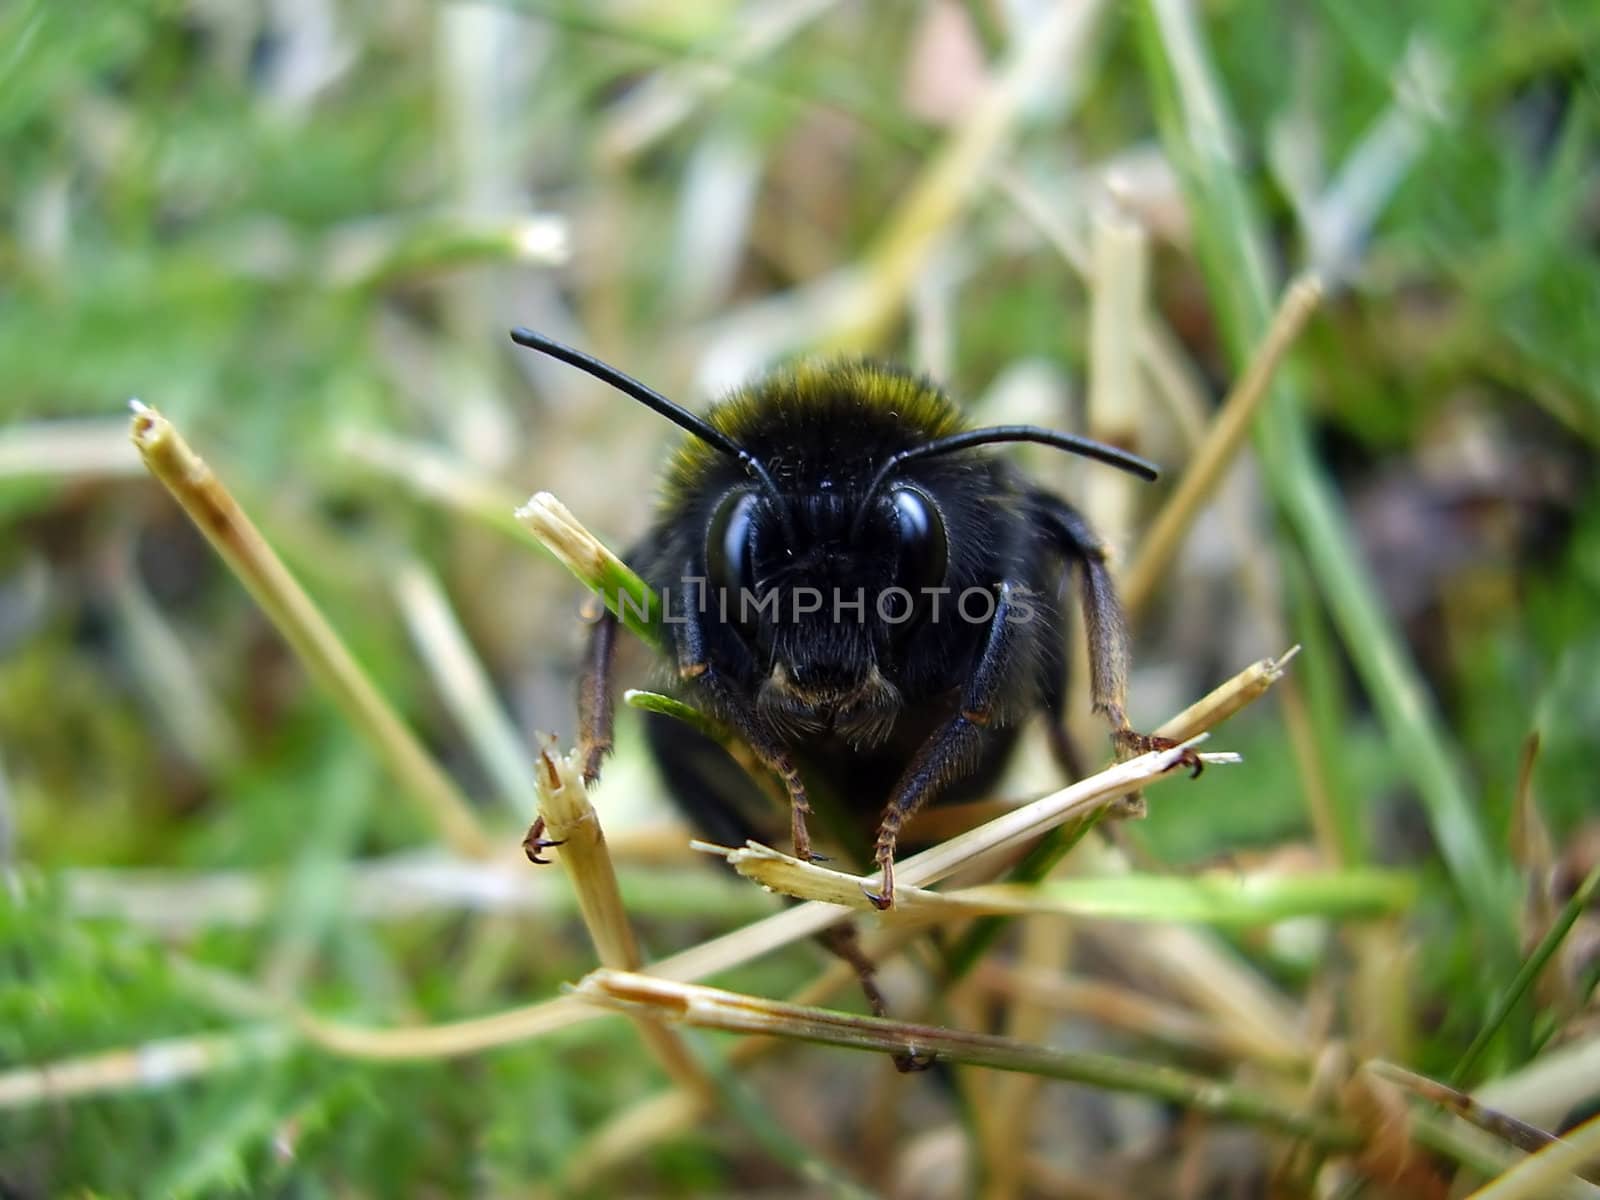 The small agressive bee in a grass.